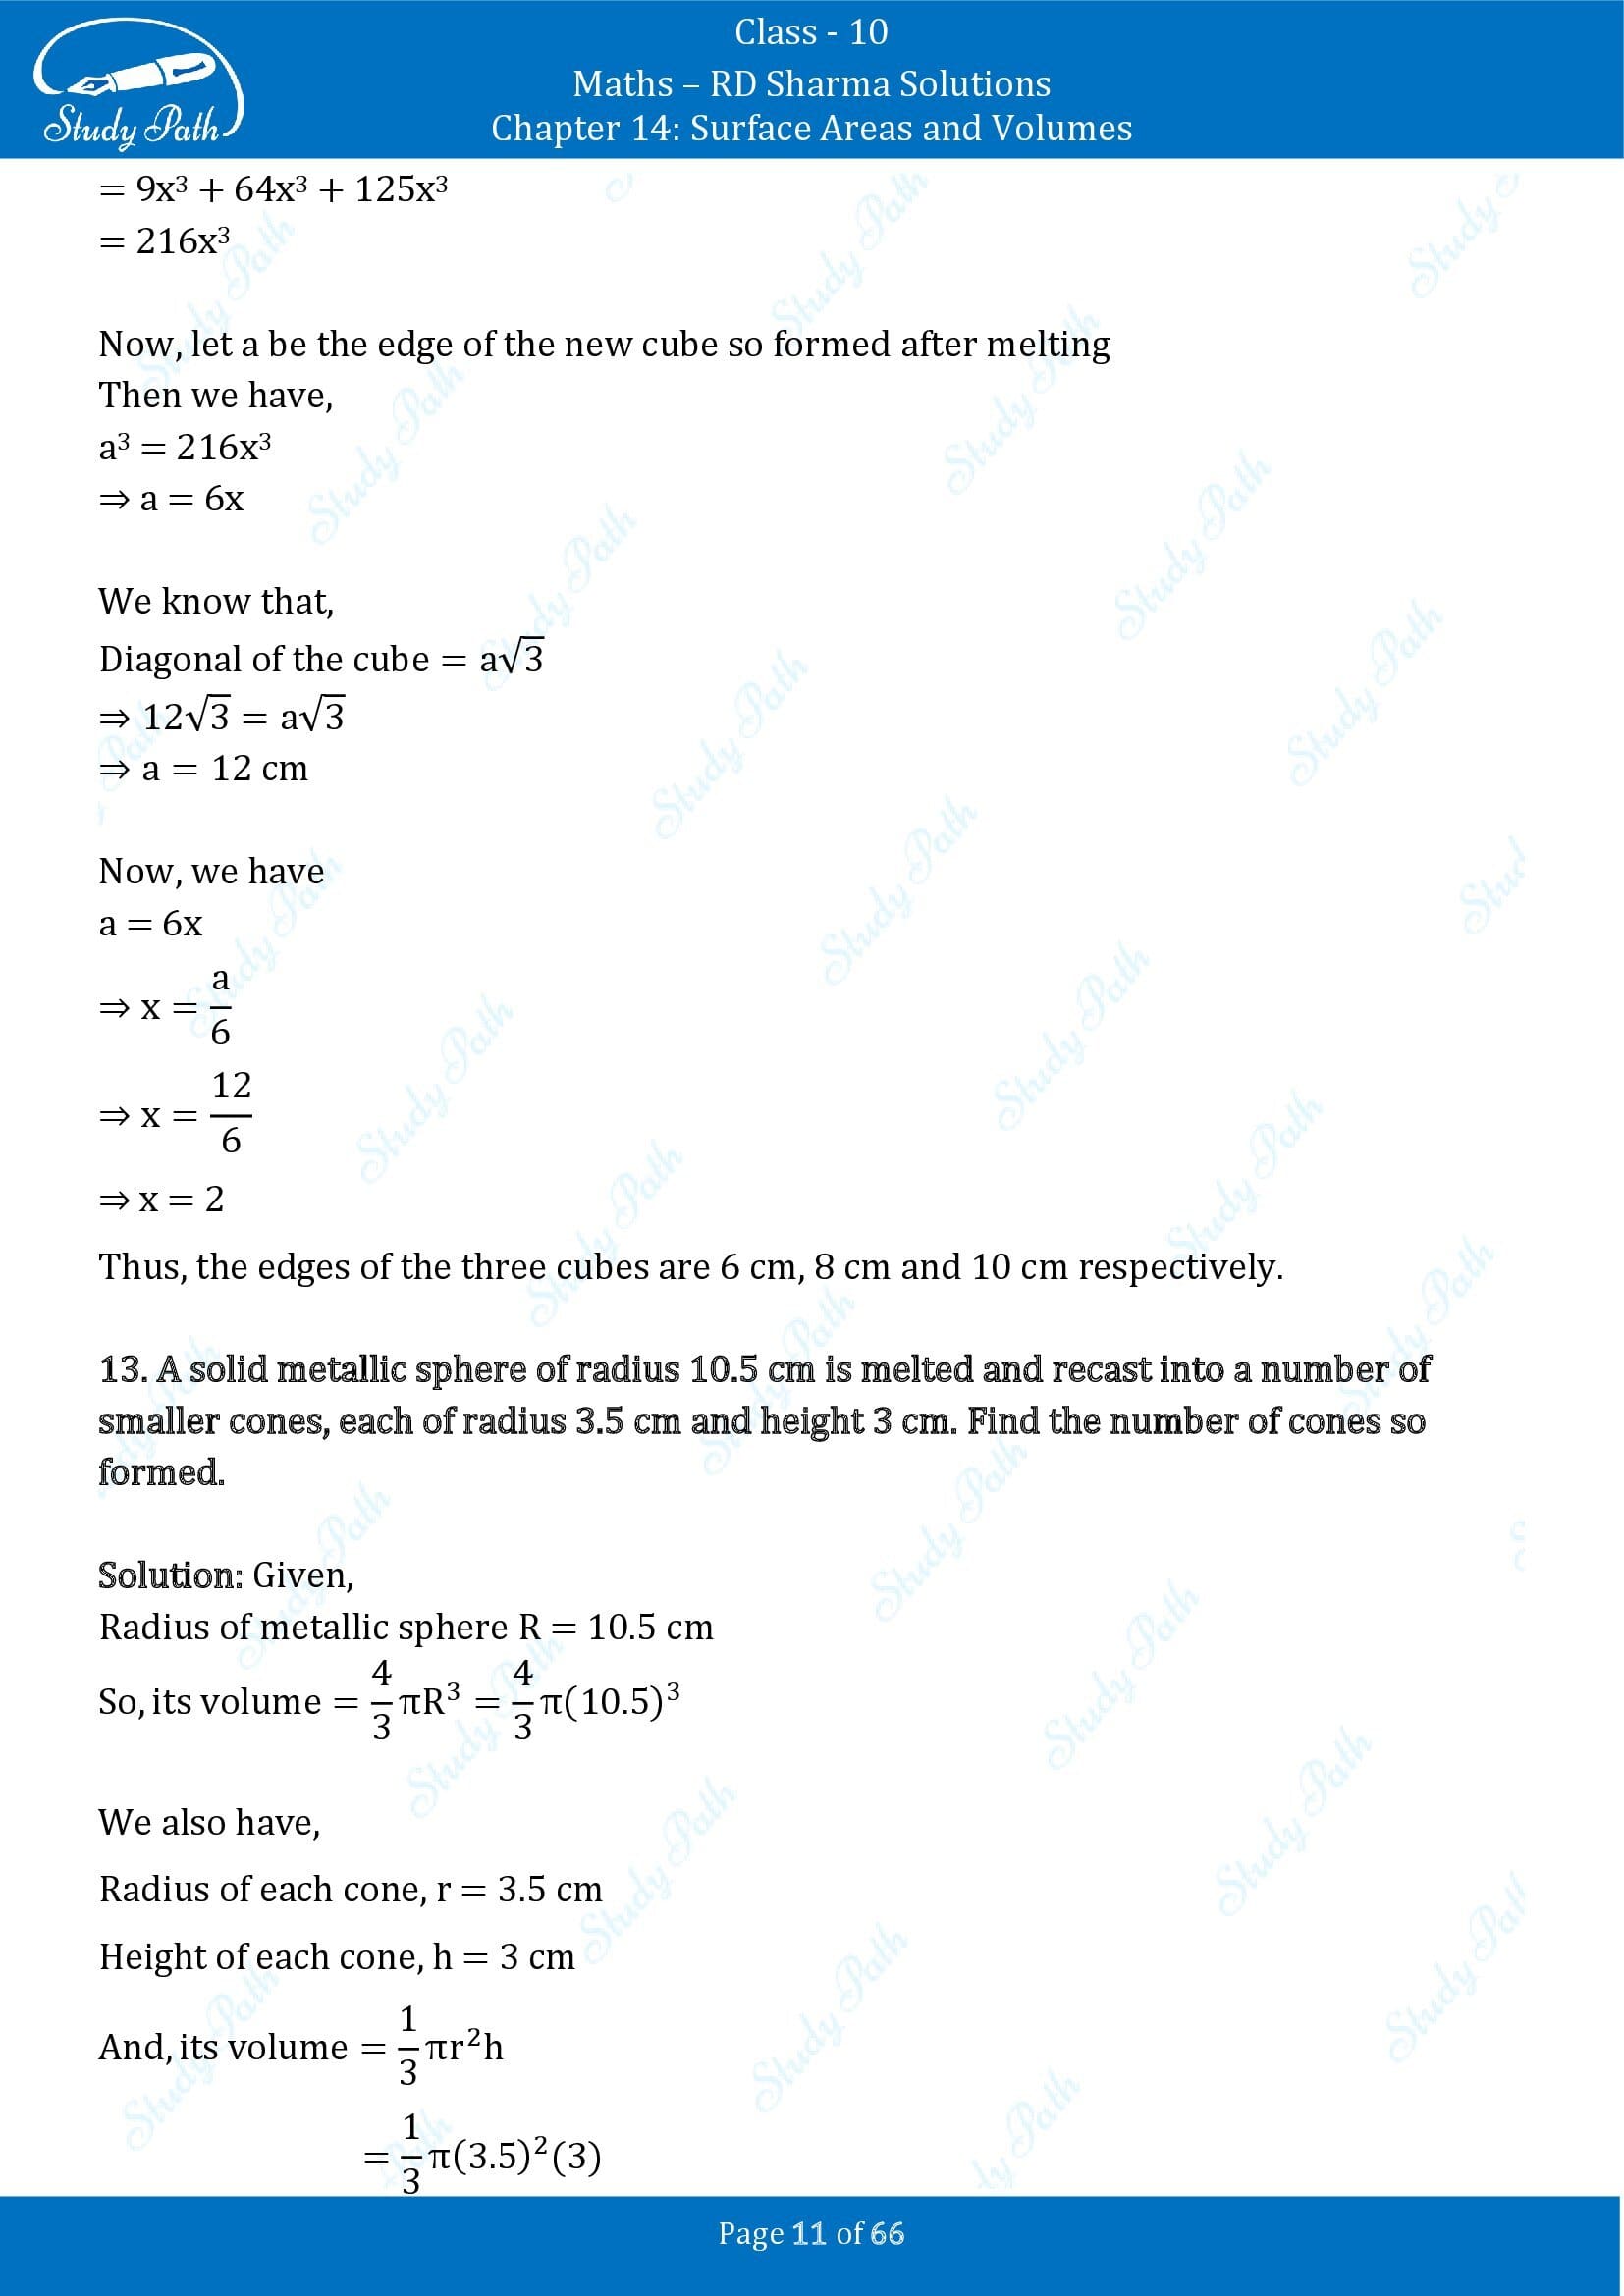 RD Sharma Solutions Class 10 Chapter 14 Surface Areas and Volumes Exercise 14.1 00011